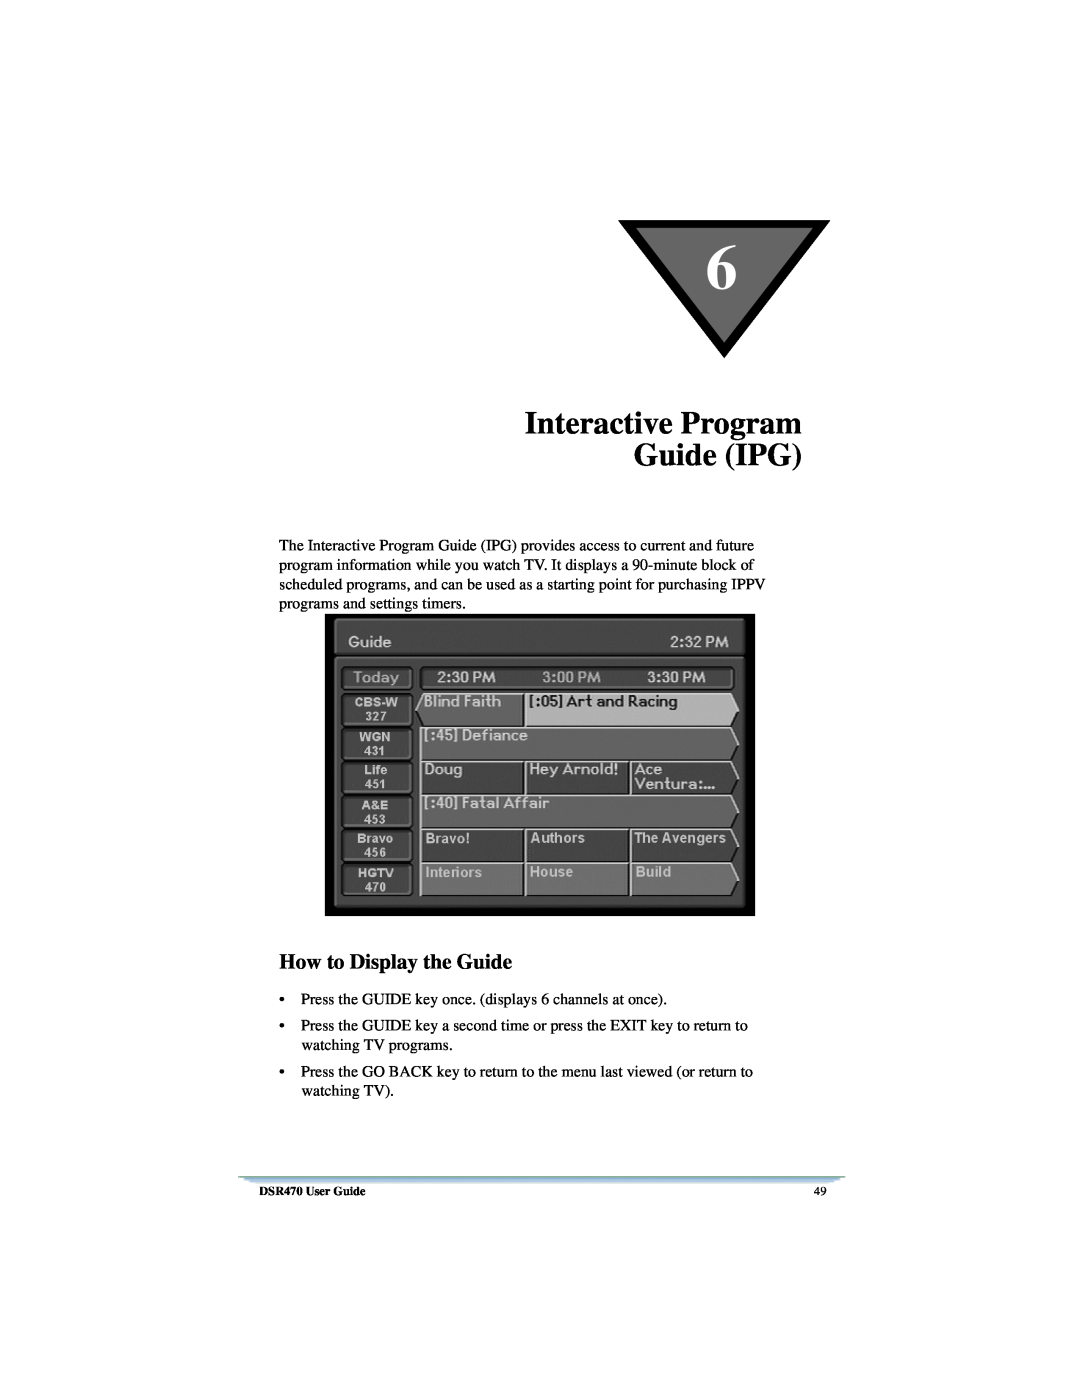 Univex DSR470 manual Interactive Program Guide IPG, How to Display the Guide 